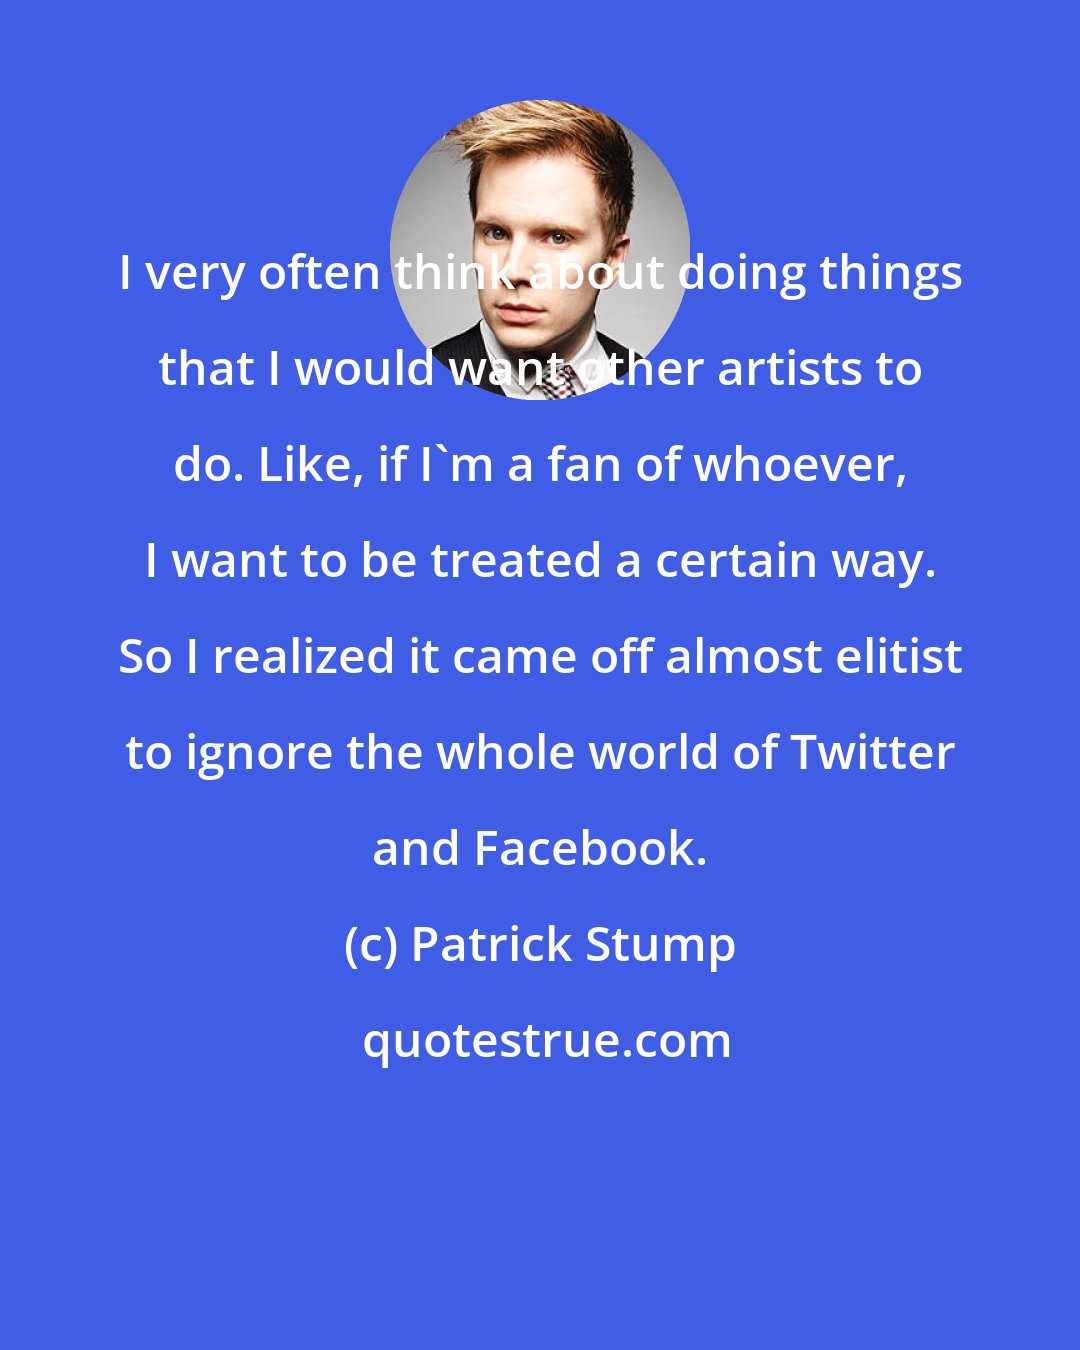 Patrick Stump: I very often think about doing things that I would want other artists to do. Like, if I'm a fan of whoever, I want to be treated a certain way. So I realized it came off almost elitist to ignore the whole world of Twitter and Facebook.